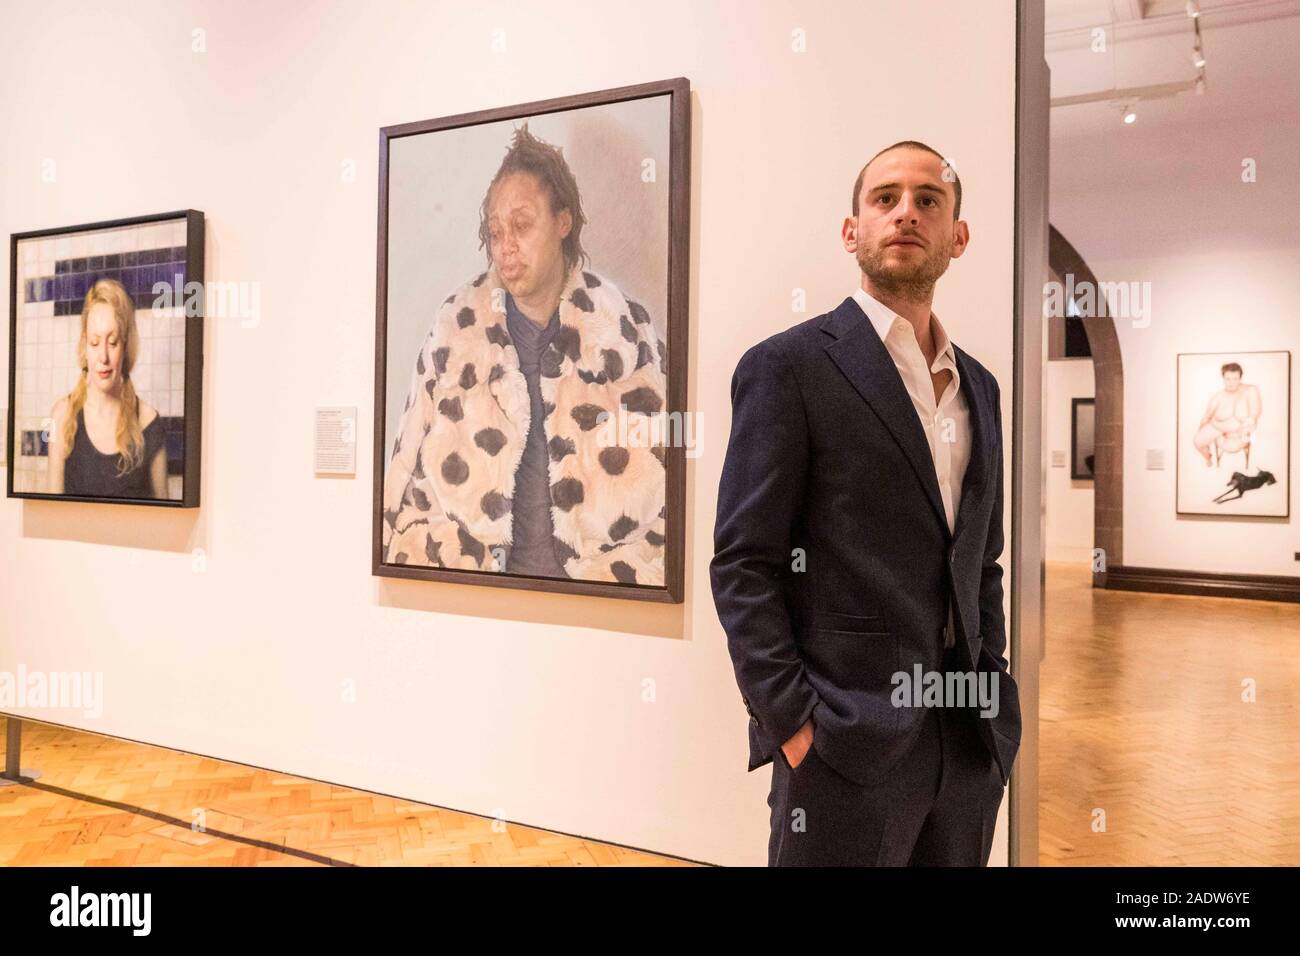 Edinburgh, United Kingdom. 05 December, 2019 Pictured: Charlie Schaffer and Imara in her Winter Coat at the BP Portrait Award Exhibition. The BP Portrait Award is the most prestigious portrait painting competition in the world and represents the very best in contemporary portrait painting. The BP Portrait Award is now in its tenth year at the Scottish National Portrait Gallery. Credit: Rich Dyson/Alamy Live News Stock Photo